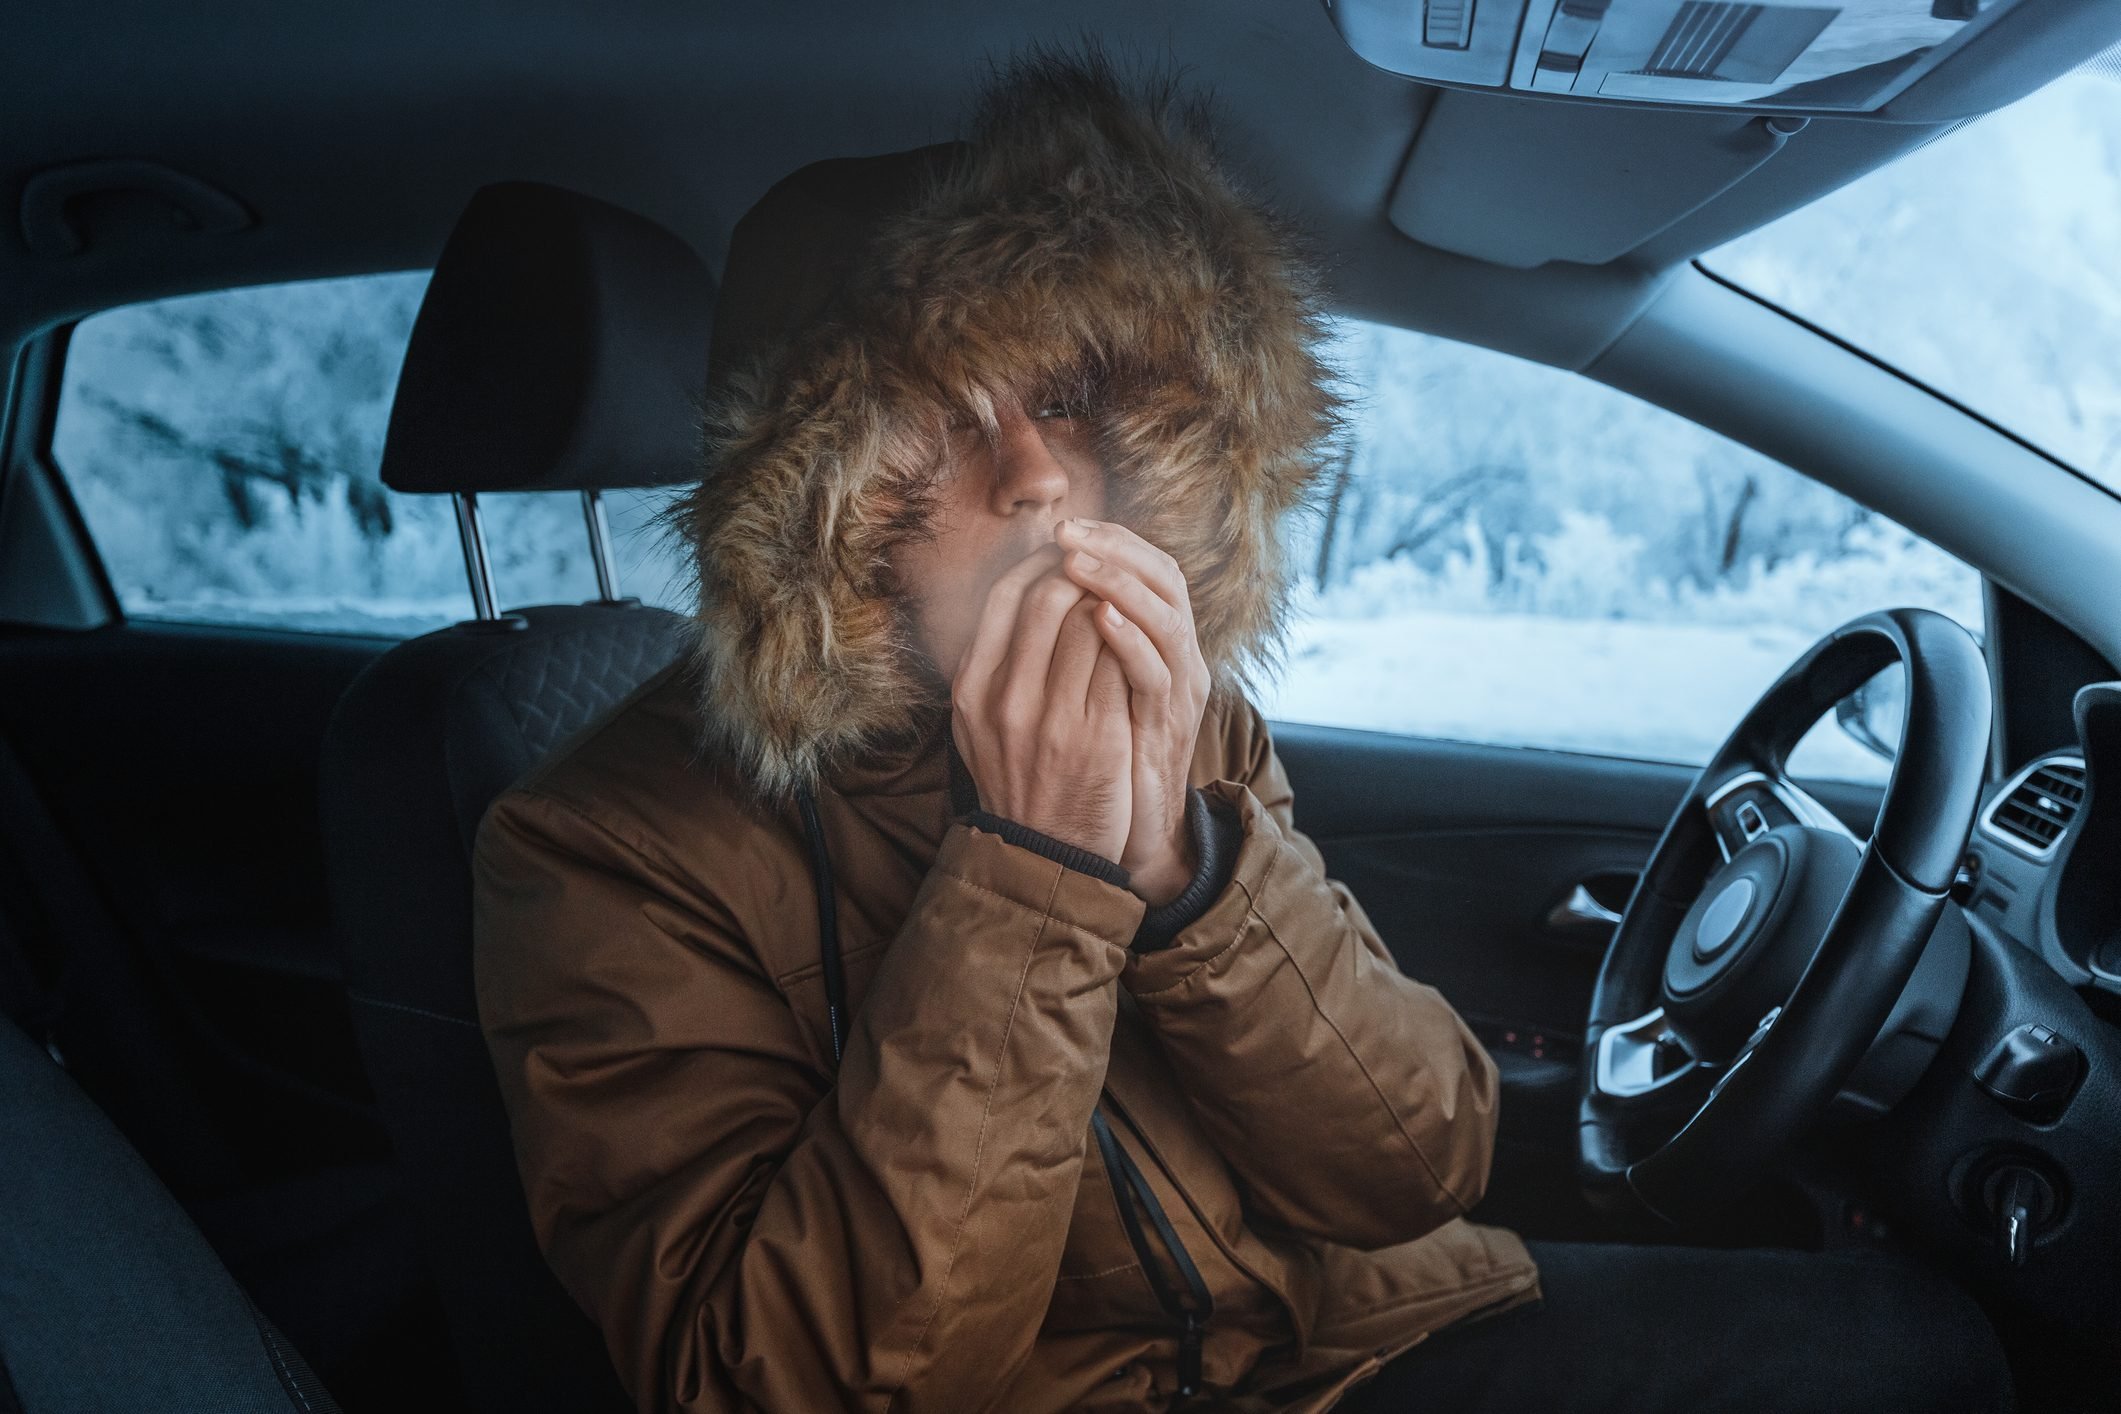 If Your Car Has No Heat, This Is What It Could Mean